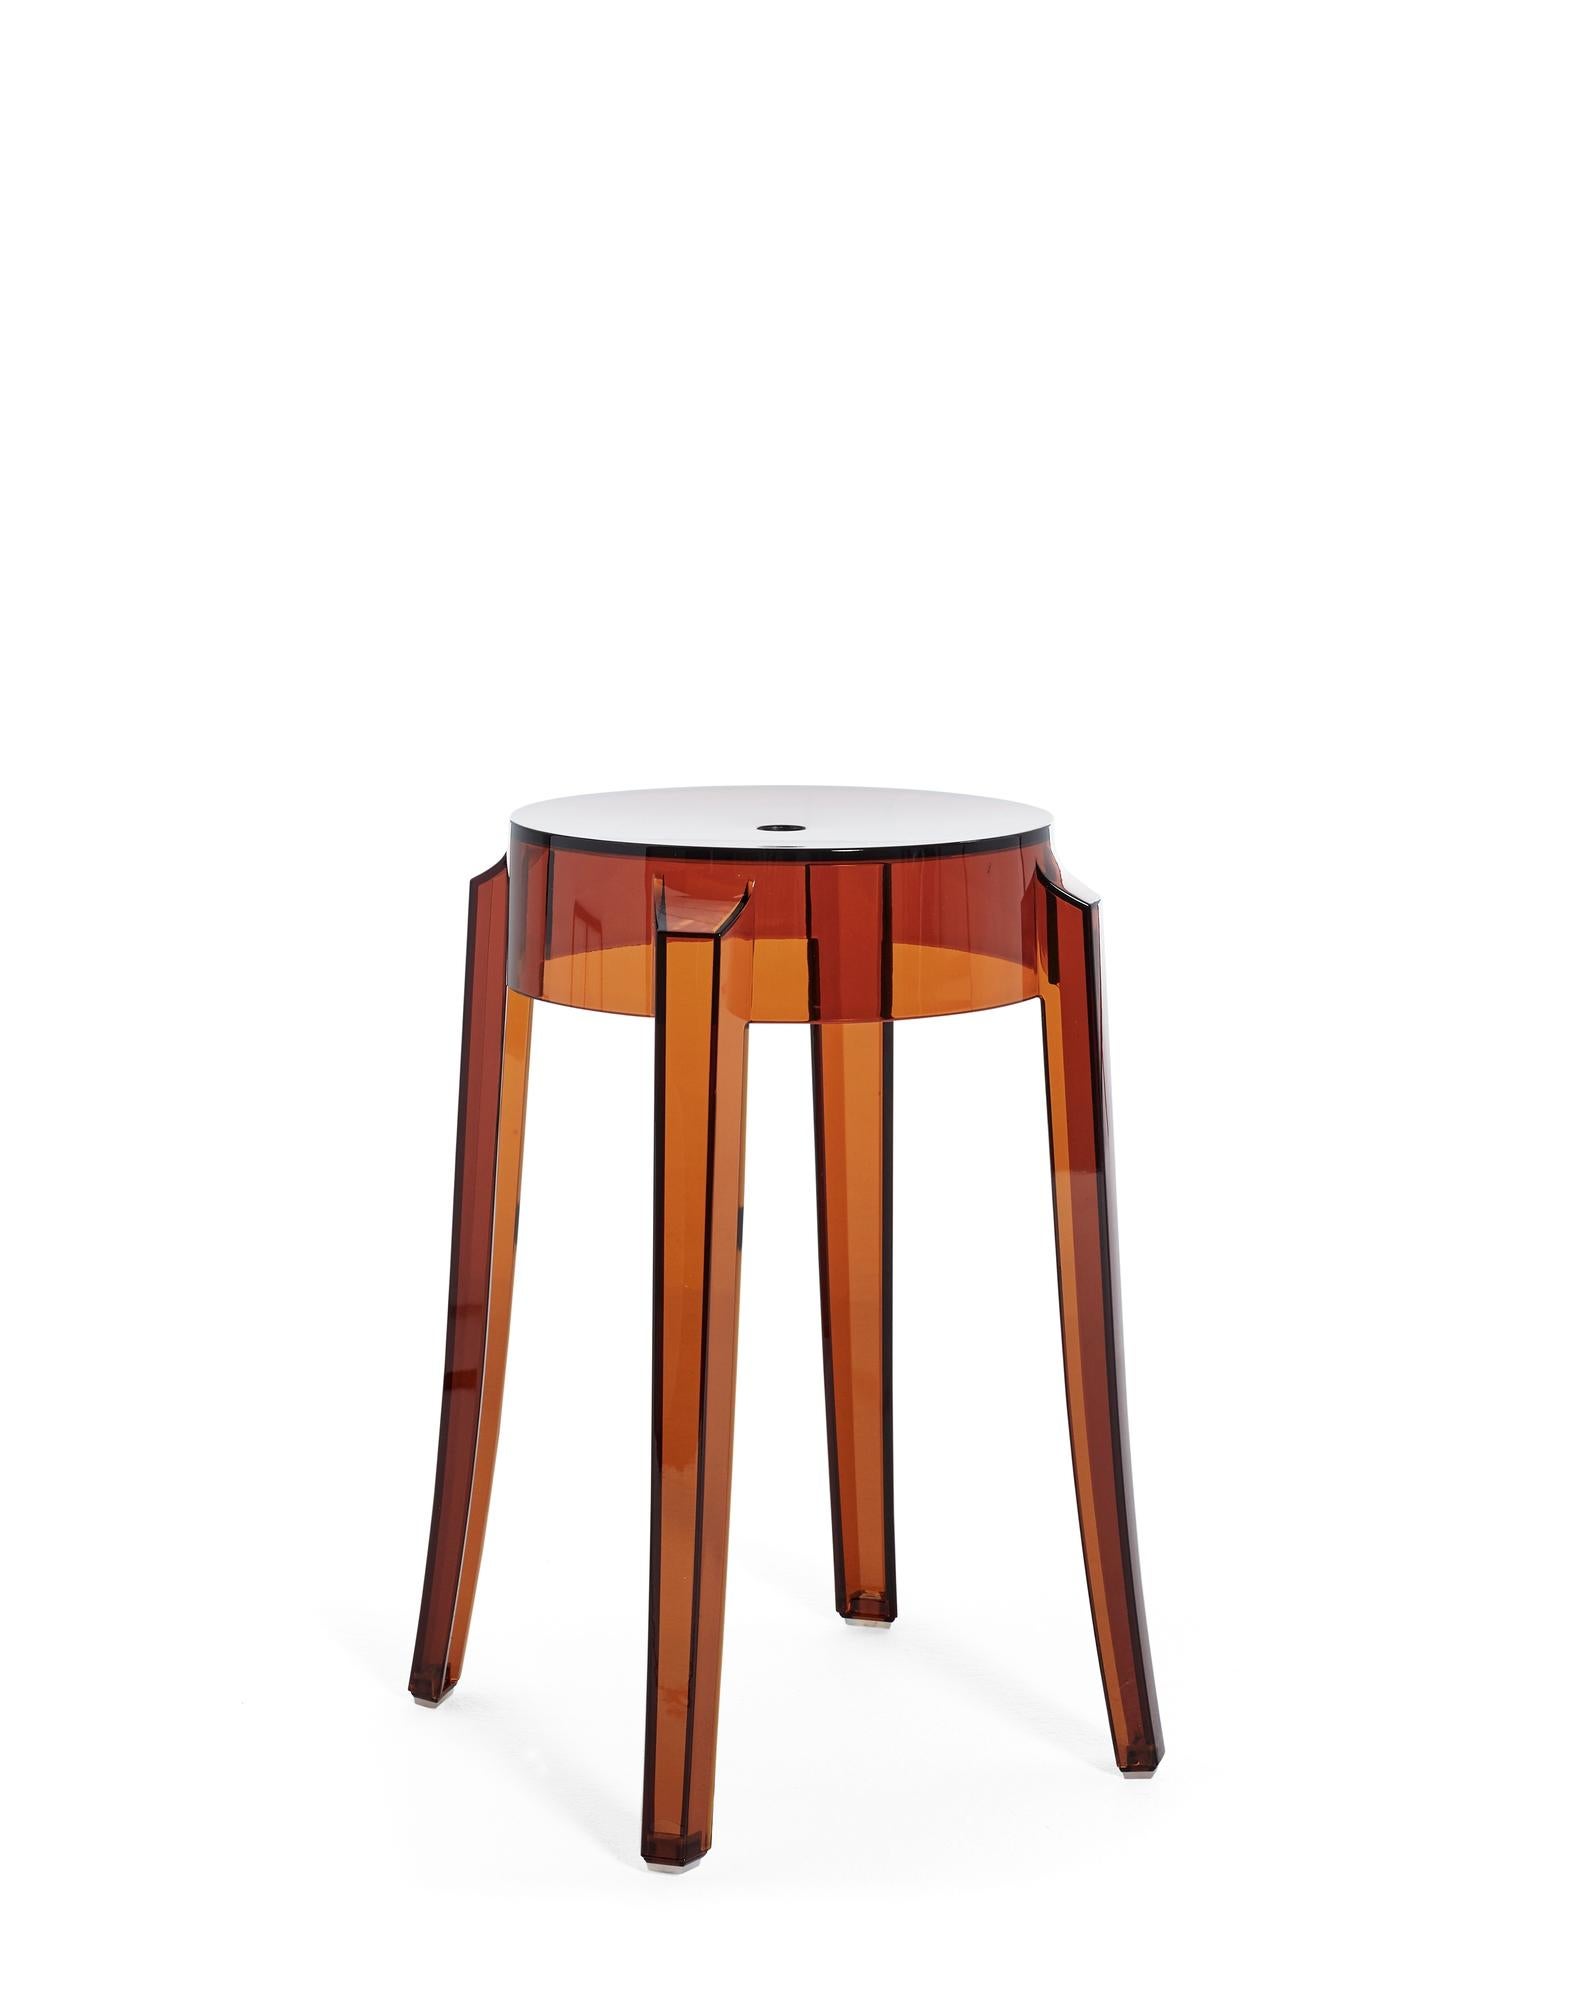 The shape conjures up stools of the 1800s and the line of the legs is rounded and slightly upturned, an icon of the Classic high stool. Charles Ghost is constructed from a single block of transparent polycarbonate which makes it indestructible and